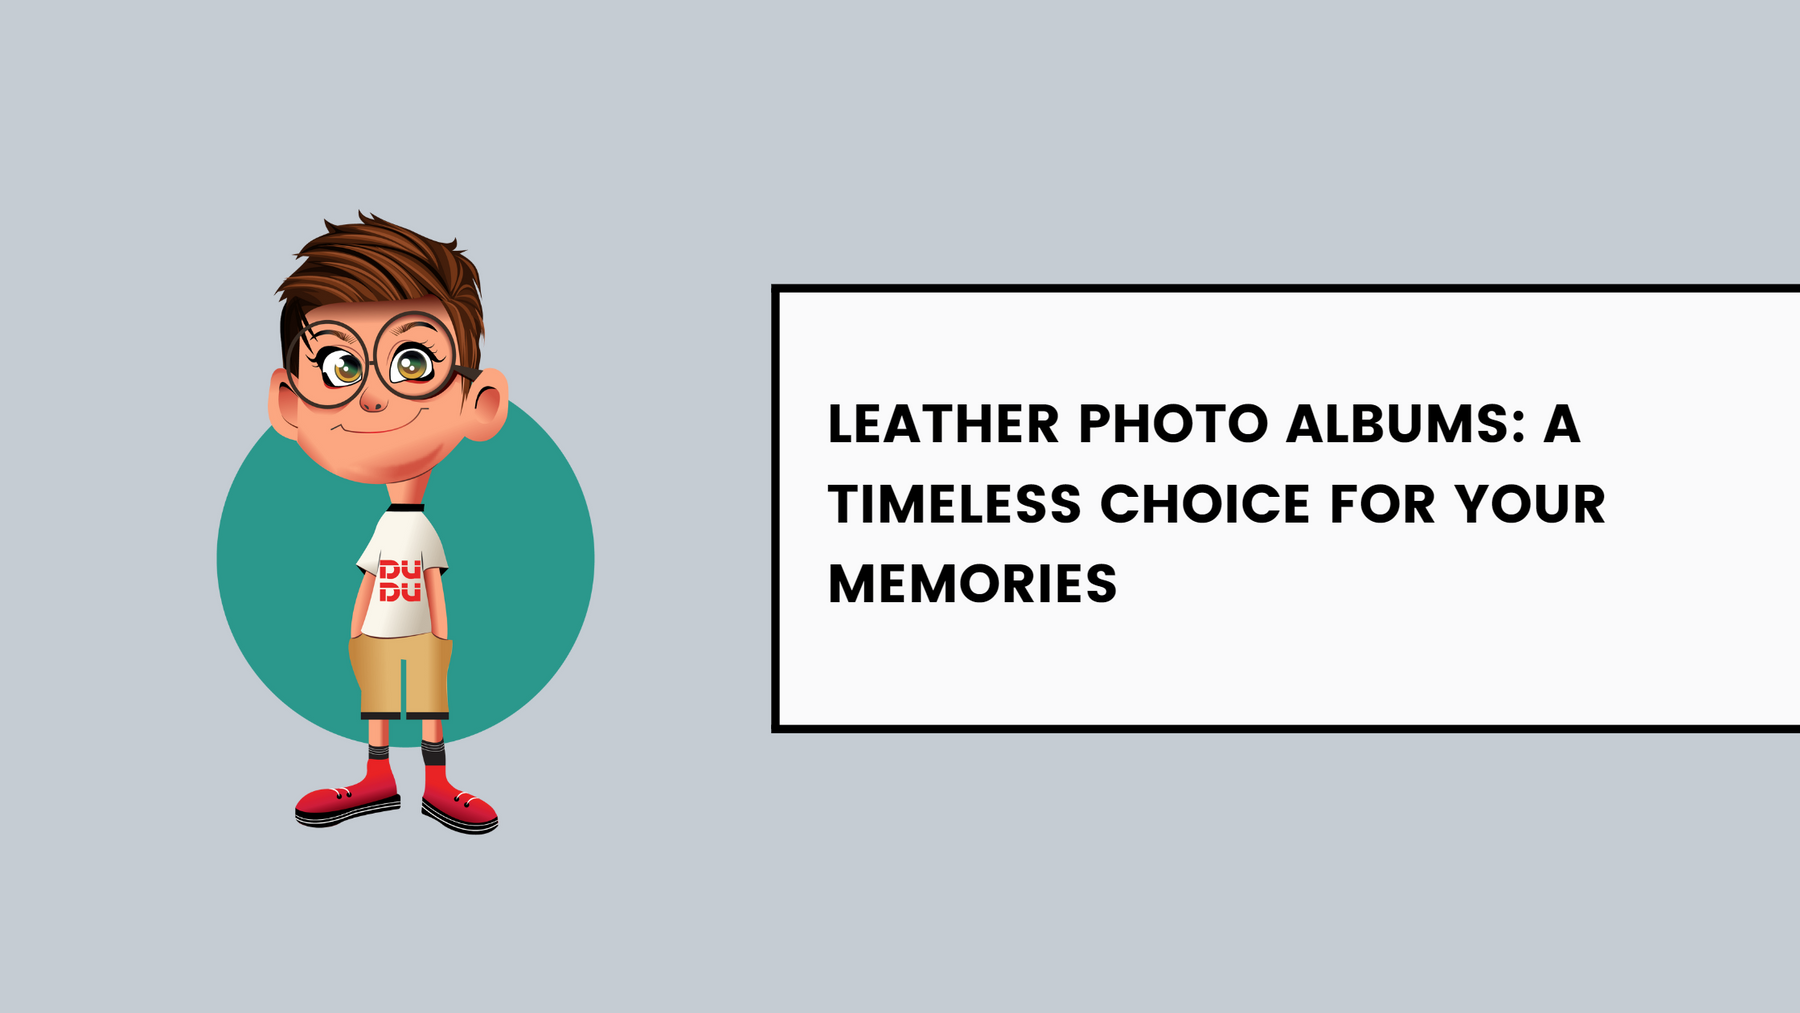 The Ultimate Guide to Choosing Leather Photo Albums for Your Timeless Memories